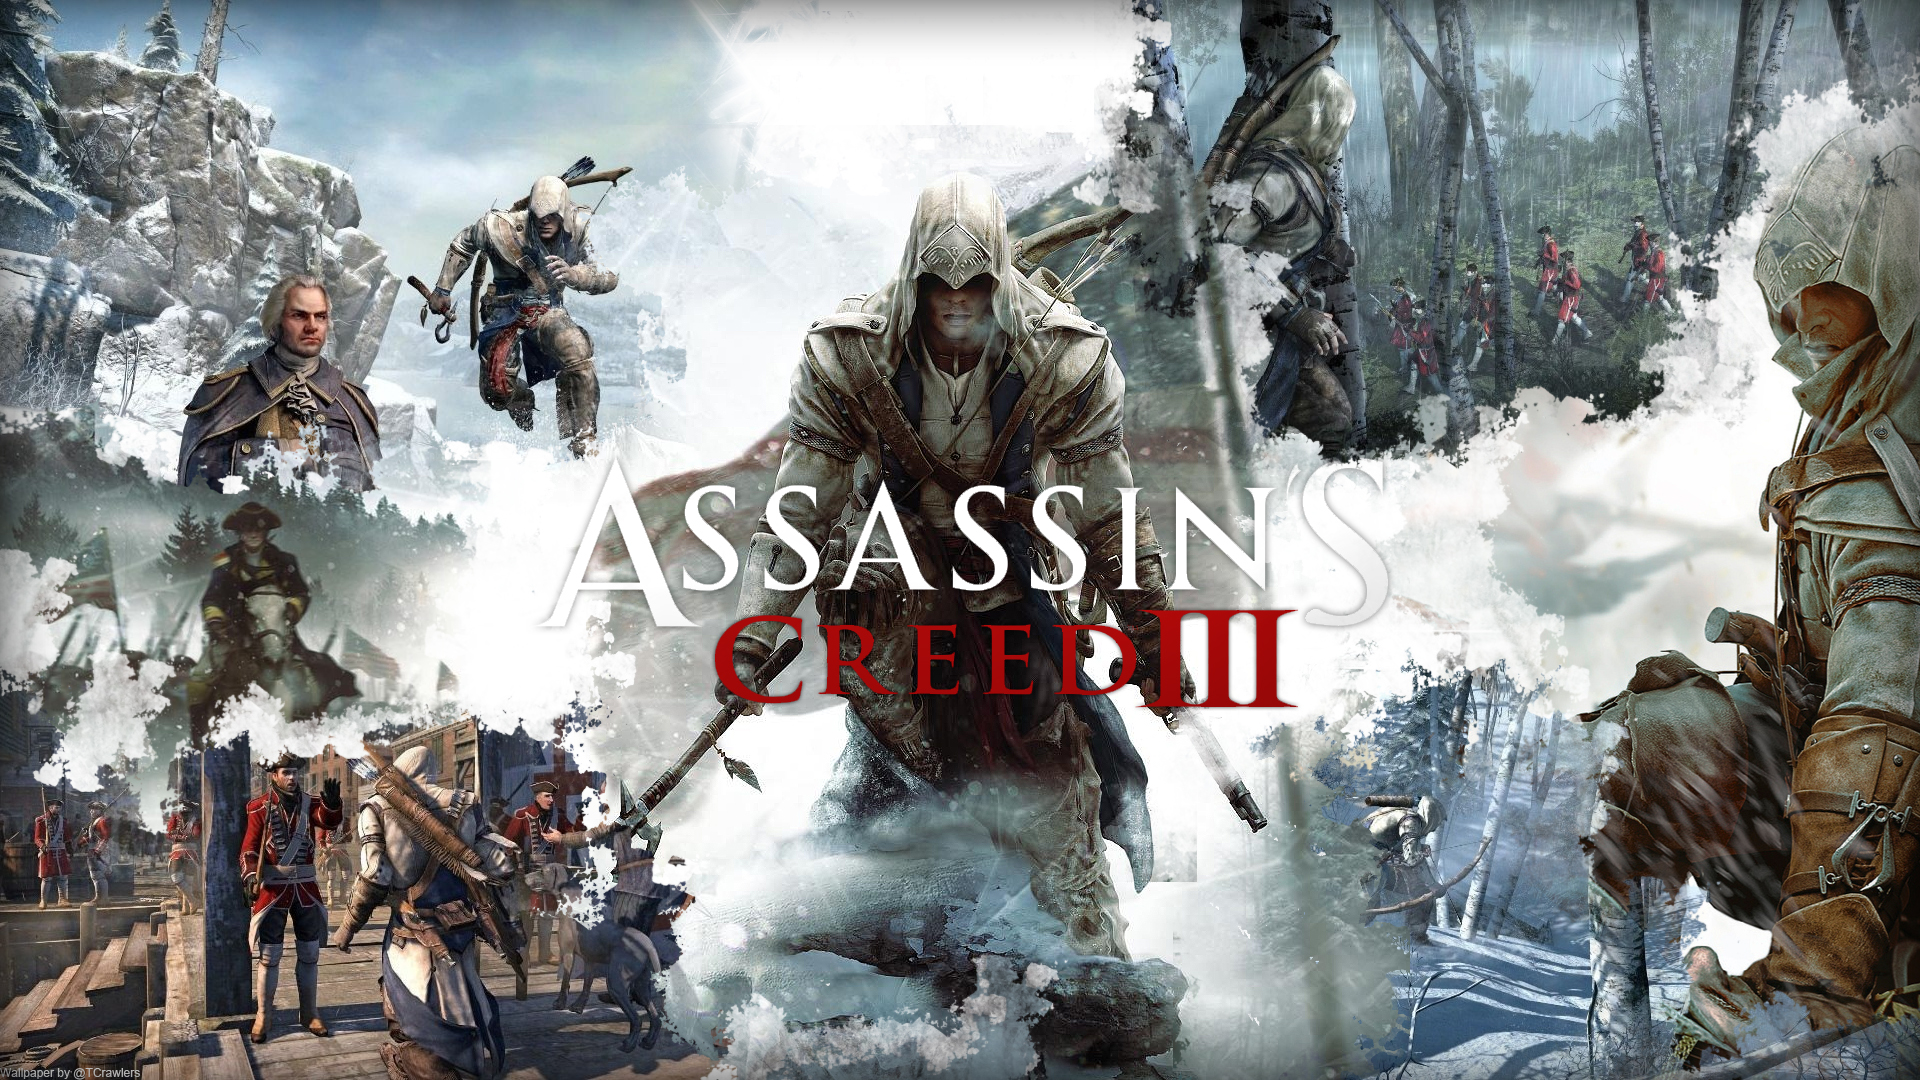 Assassin's Creed 3 Save Game | Save Game, Cheat codes, Game ...